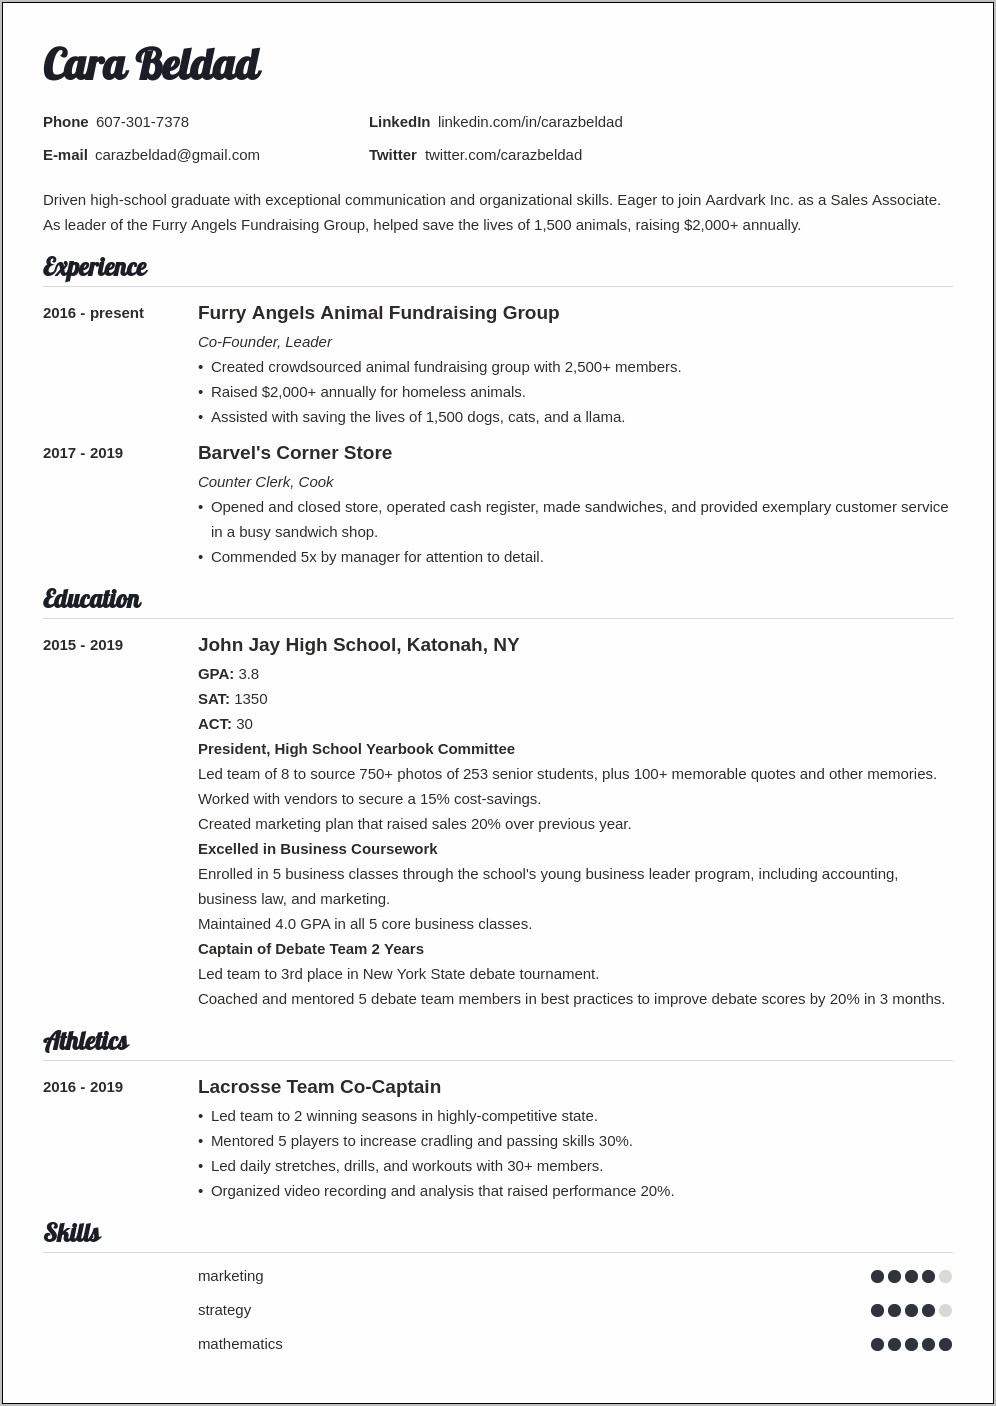 Sample Resume For Highschool Graduate With Little Experience